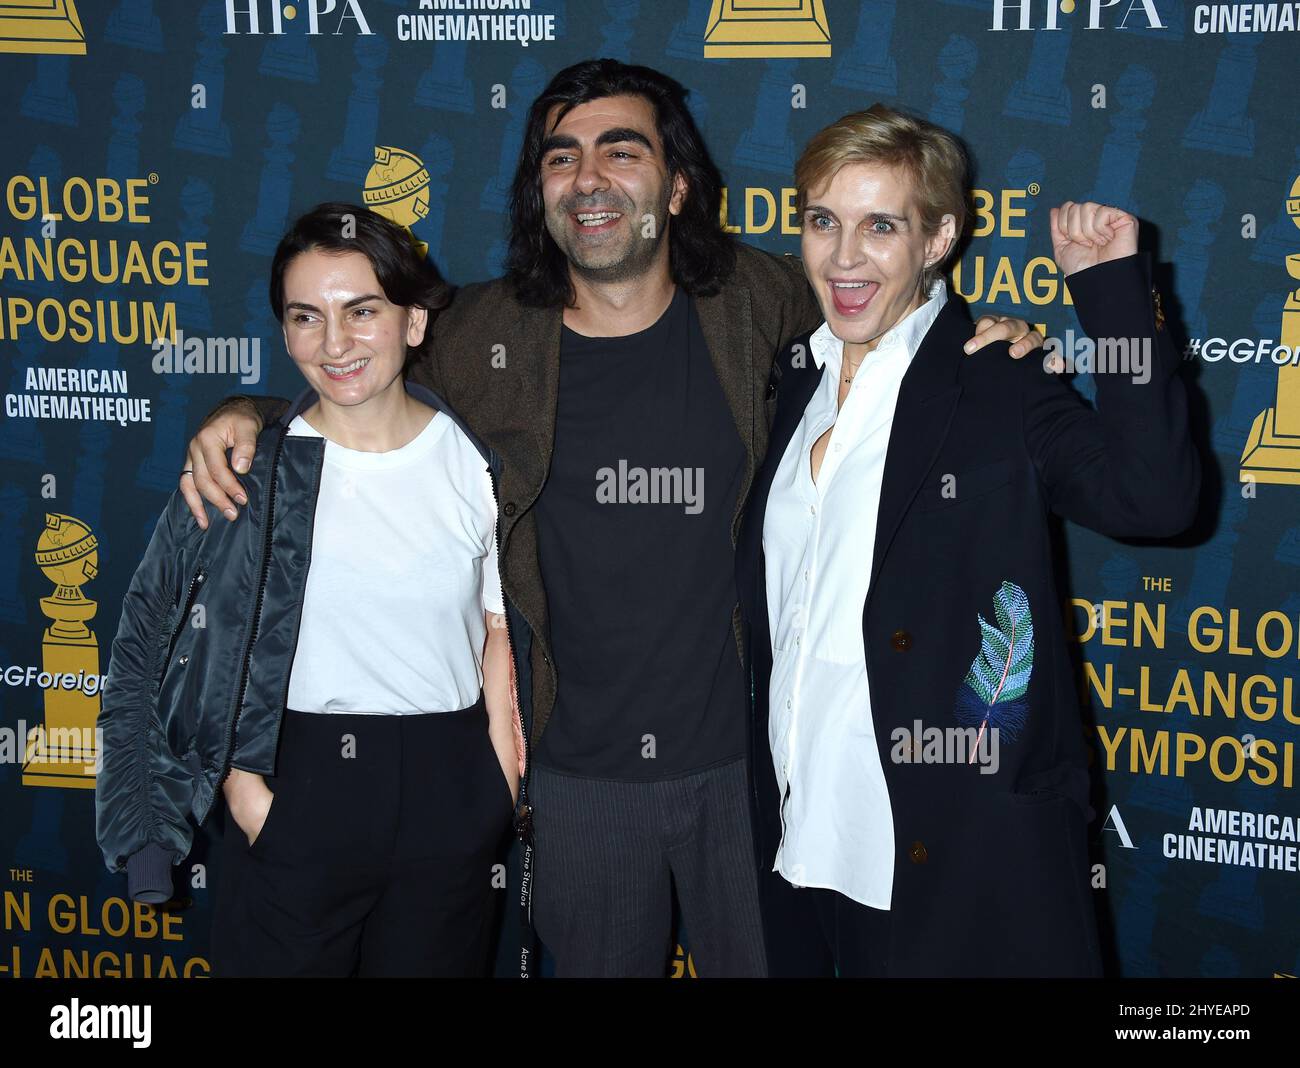 Nurhan Sekeri, Fatih Akin and Melita Toscan Du Plantier at the HFPA and American Cinematheque present the Golden Globe Foreign-Language nominees series 2018 symposium held at the Egyptian Theatre on January 6, 2018 in Hollywood, CA Stock Photo